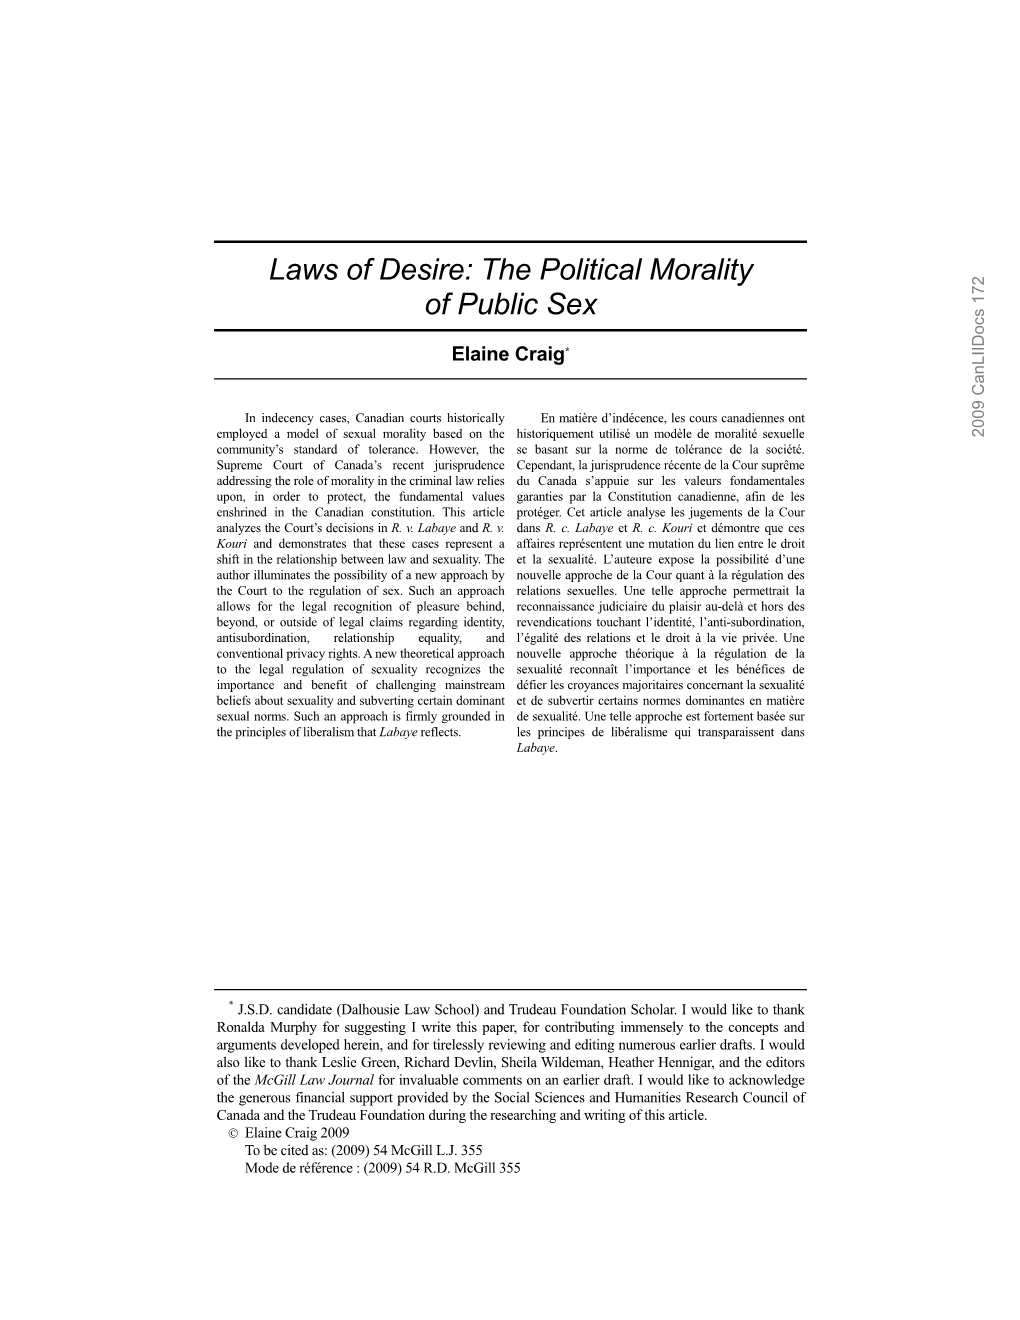 Laws of Desire: the Political Morality of Public Sex